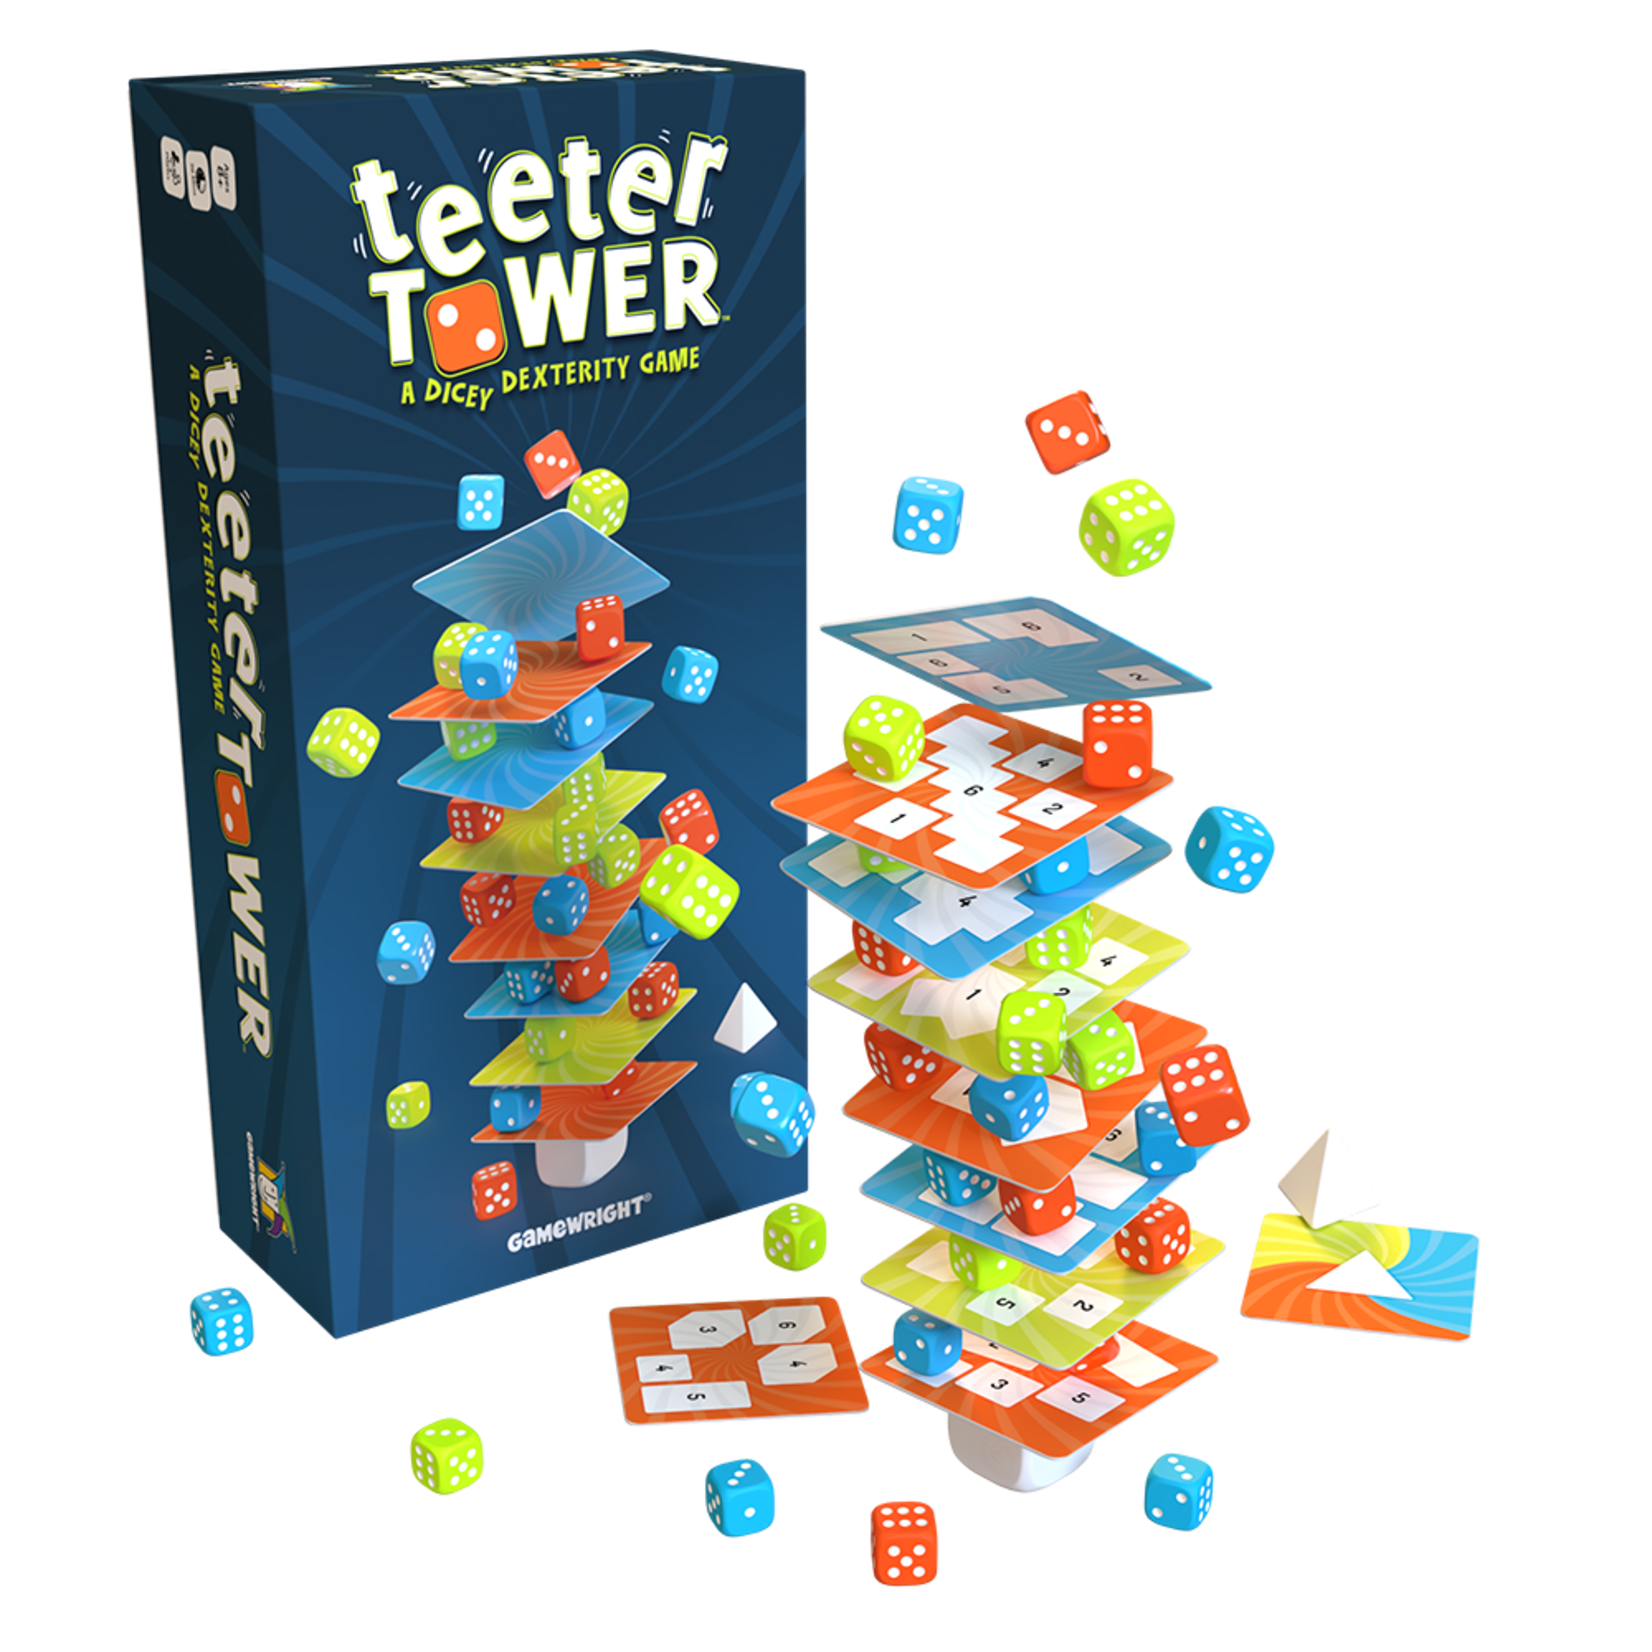 Gamewright Teeter Tower: A Dicey Dexterity Game